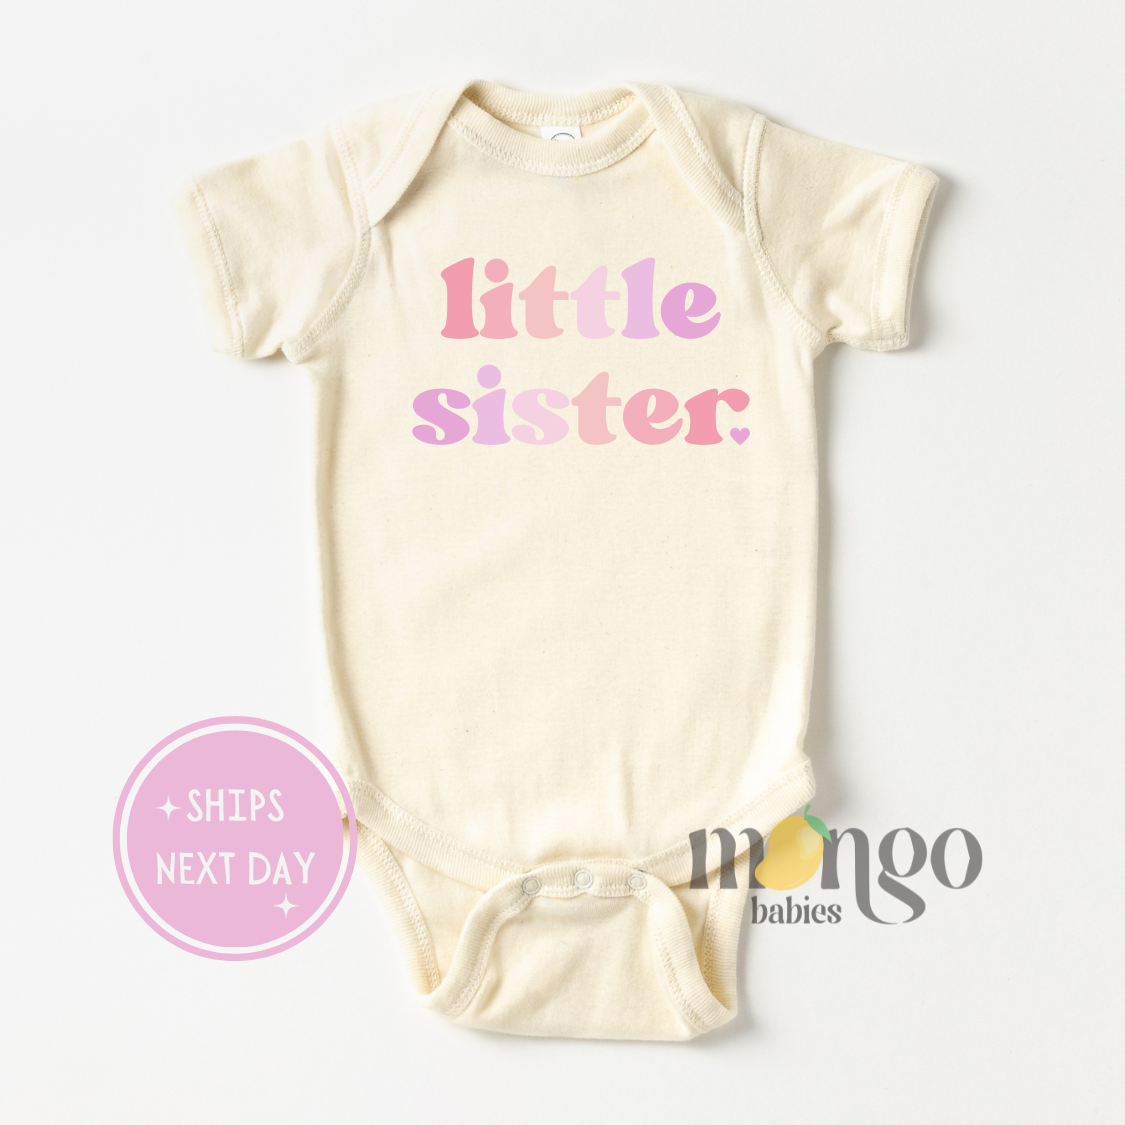 where to buy cute pastel pink "little sister" baby clothes best little sister baby clothes for newborns most popular graphic text baby clothes for girls matching big sister and little sister outfits little sister baby clothes outfit ideas how to style "little sister" baby clothes pastel pink baby clothes on sale discount little sister baby clothes free shipping on little sister baby clothes